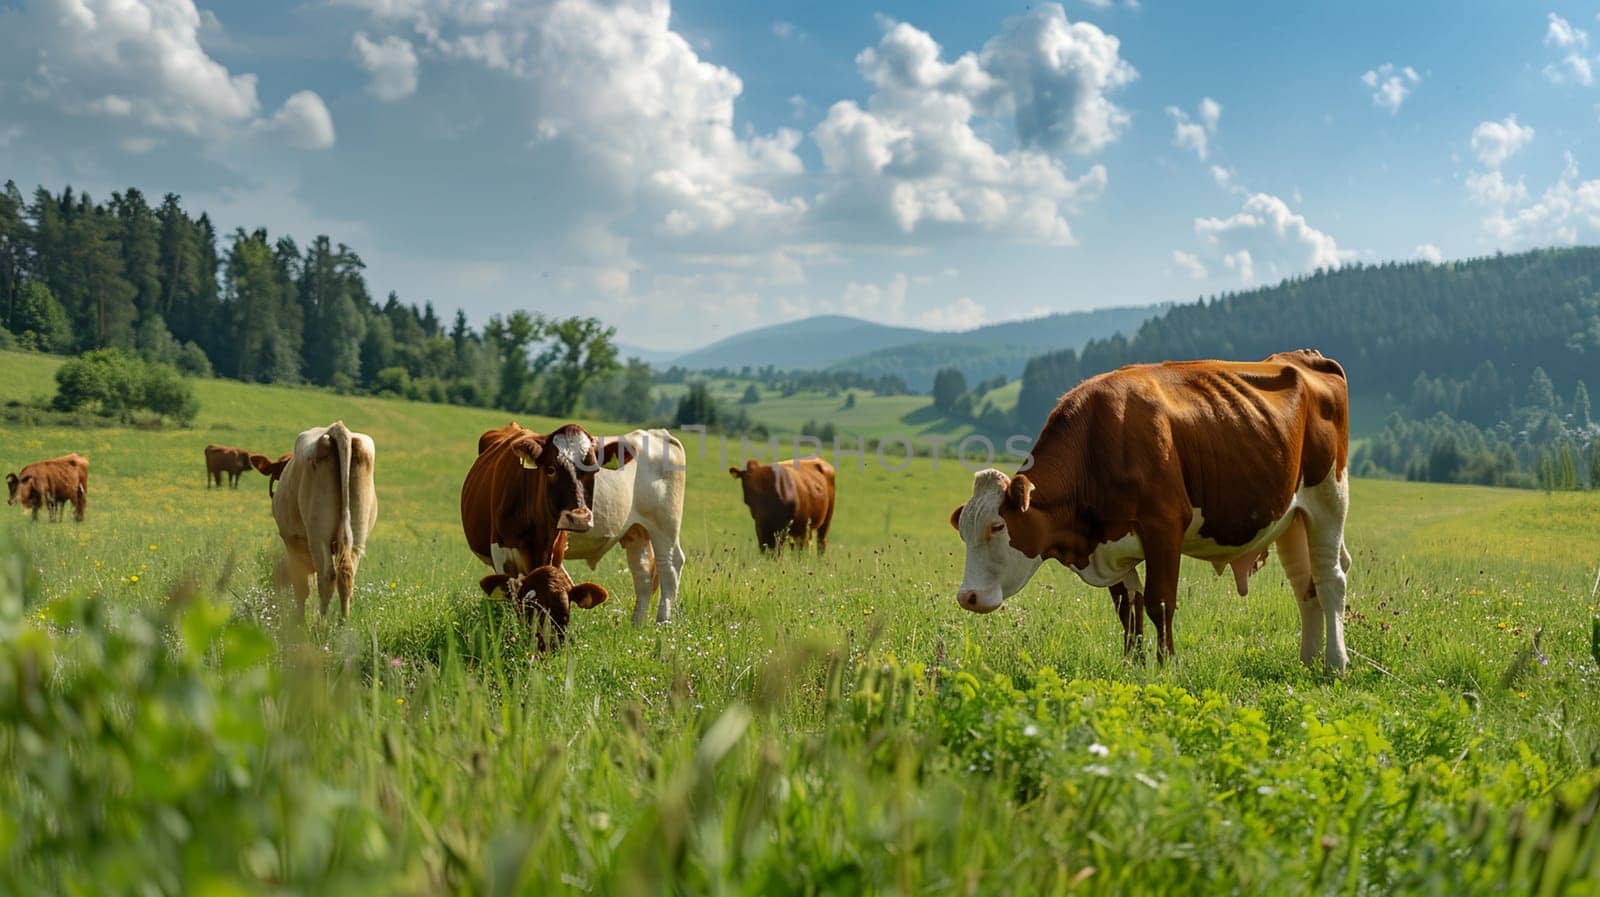 Herd of cows grazing on lush green pasture in countryside landscape with blue sky, trees and hills in background, farming and rural life concept.